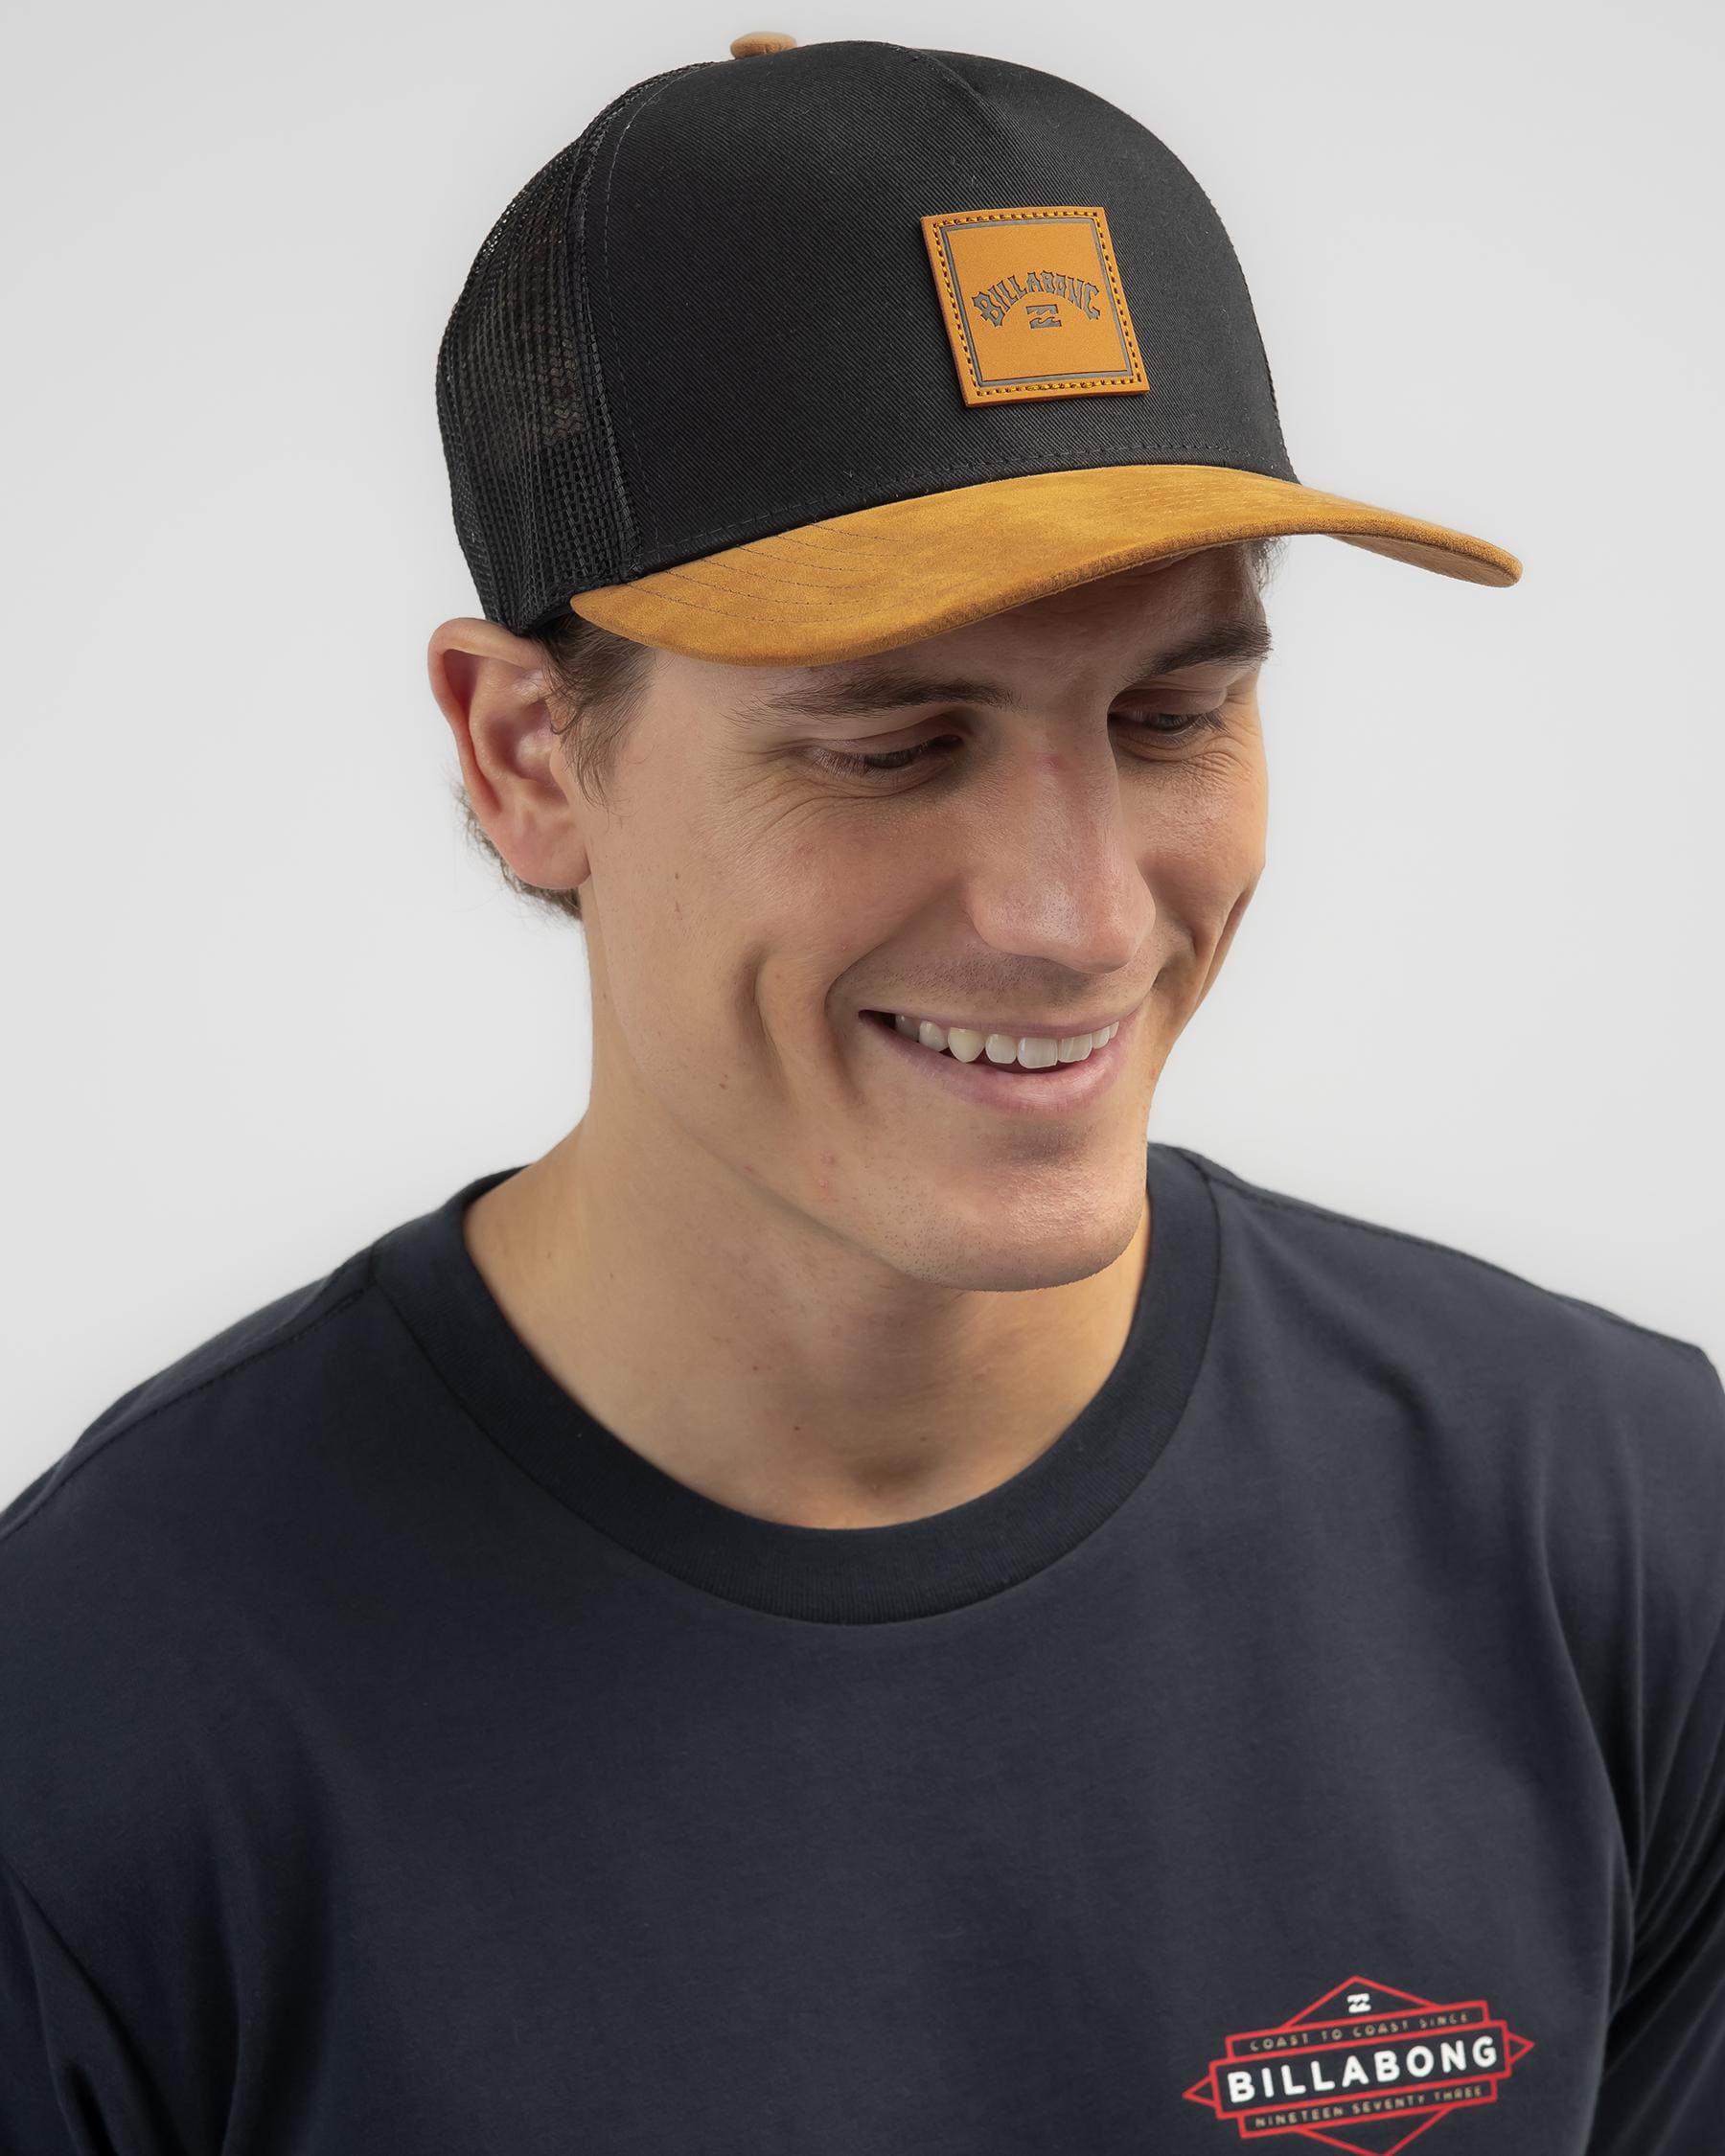 Beach Billabong Shipping In United & Trucker FREE* Stacked City Black/tan States Cap Returns - - Easy